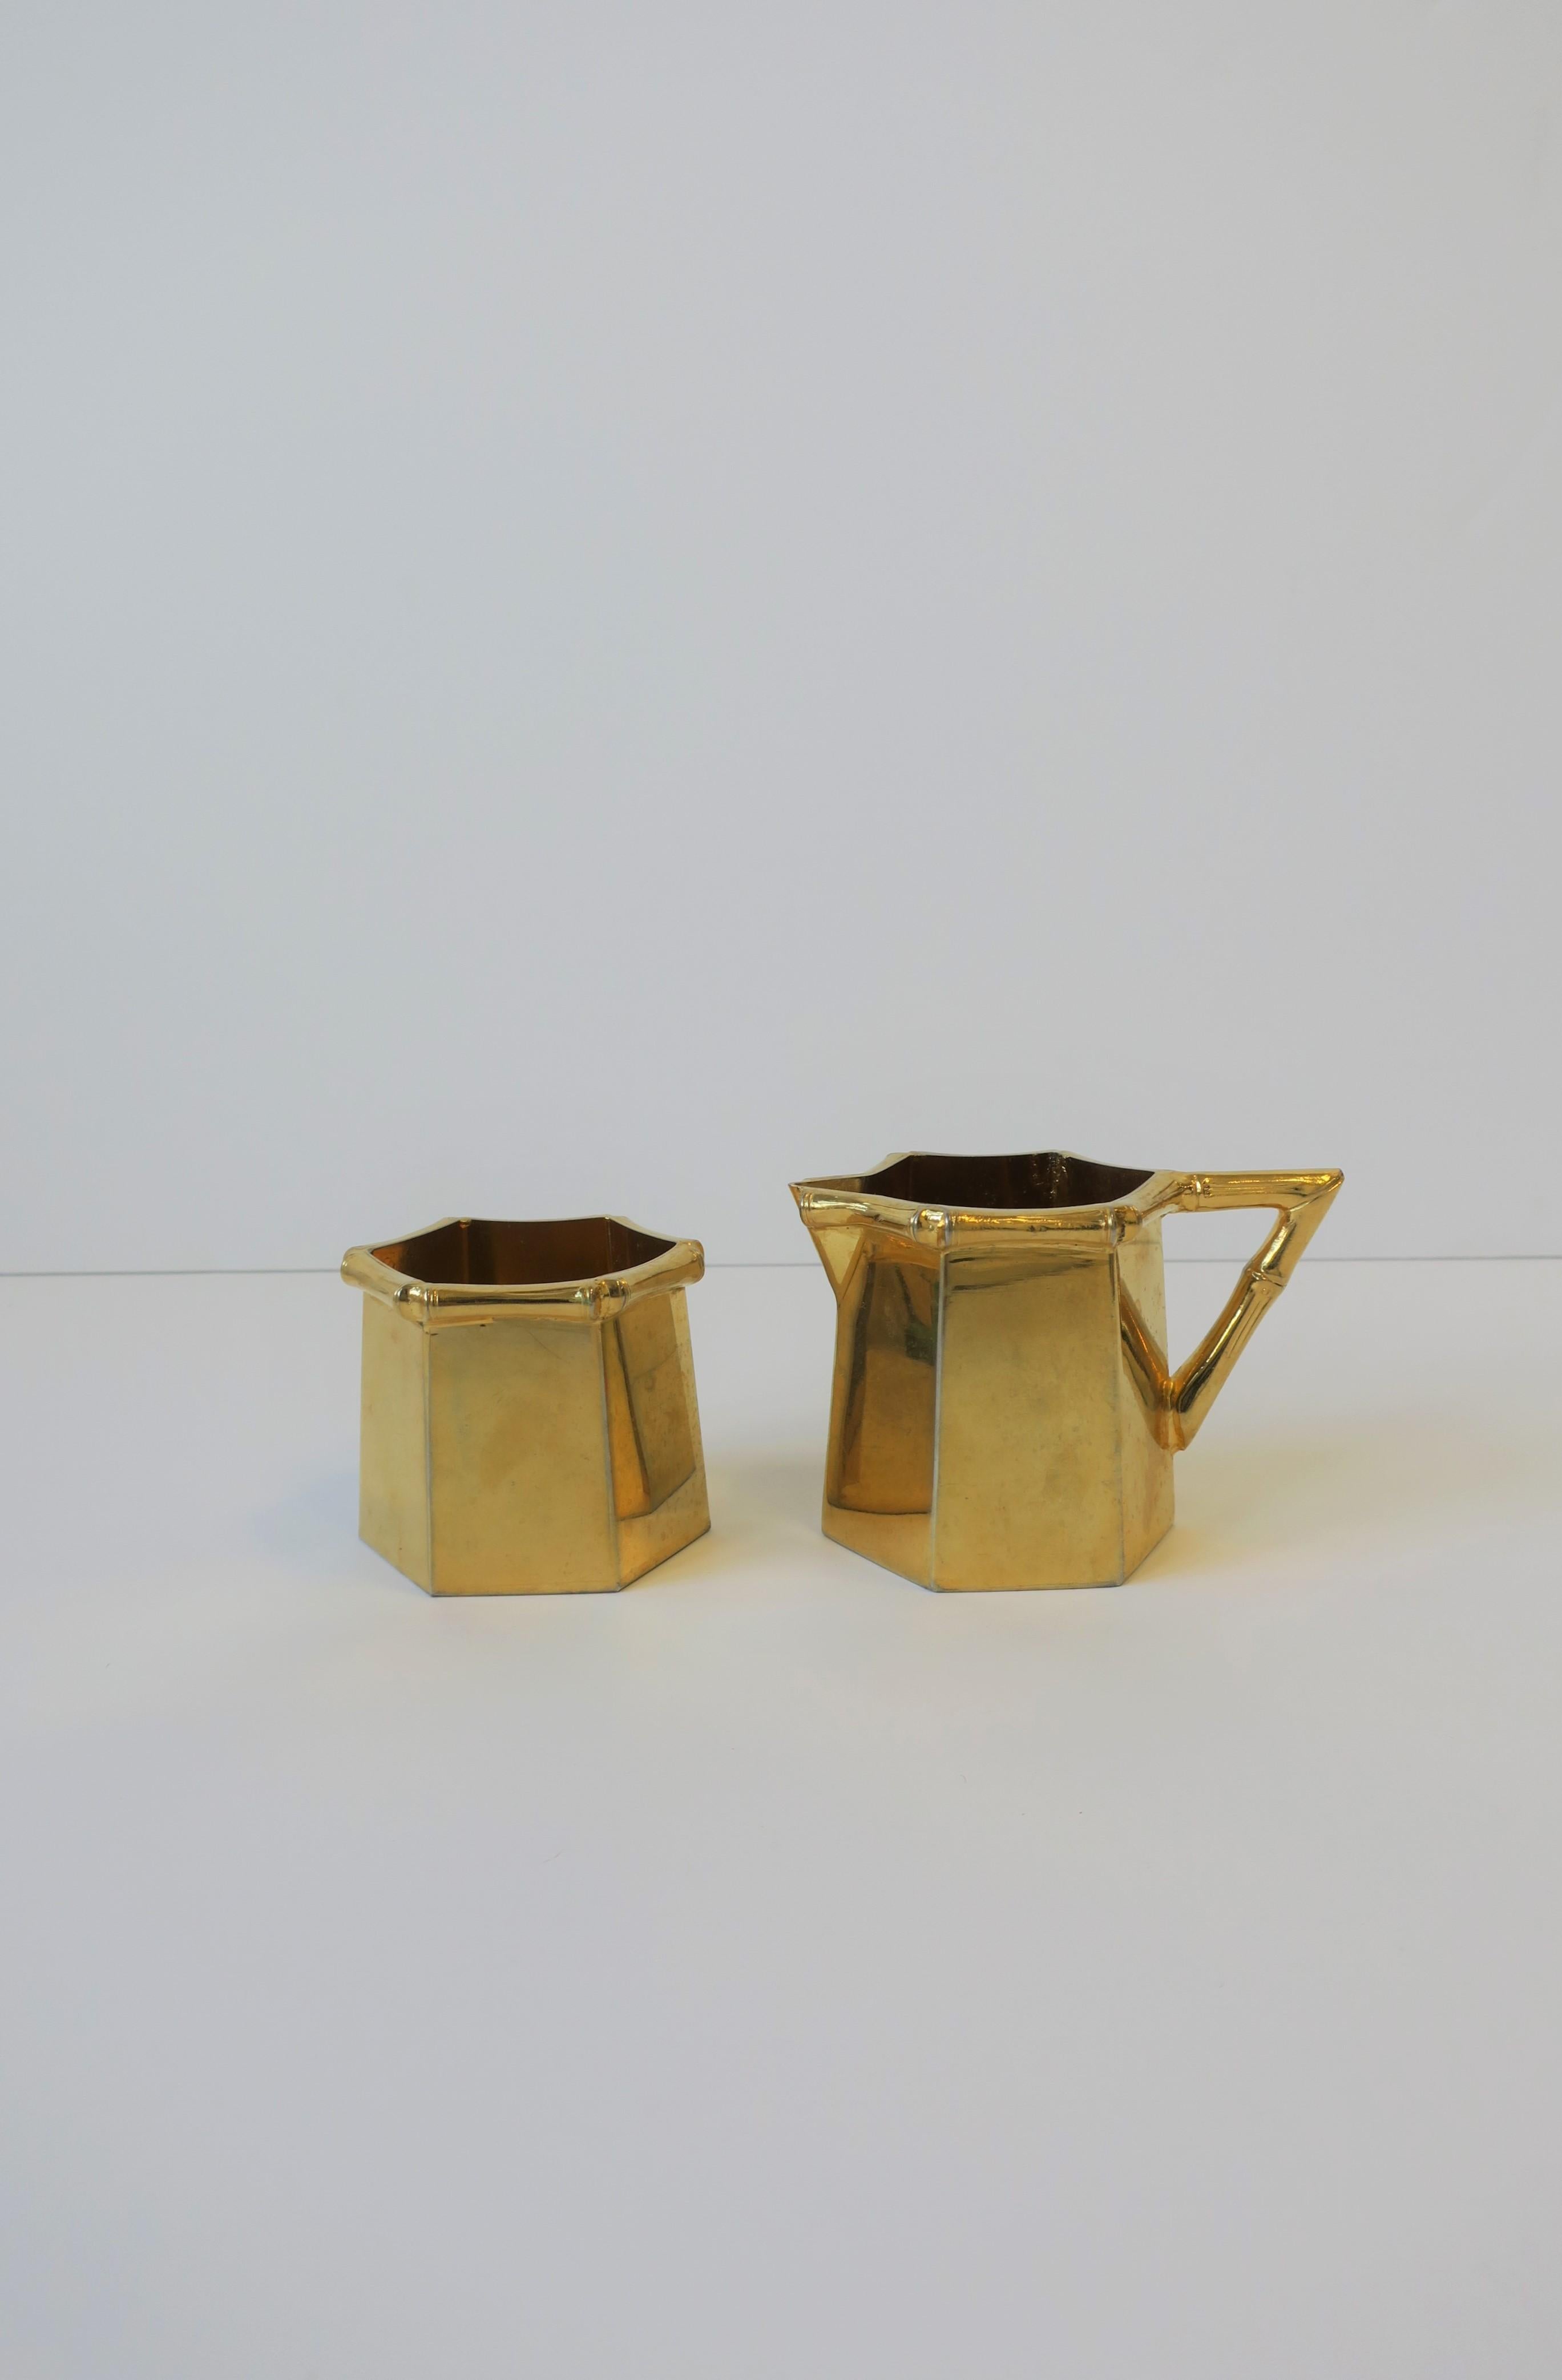 A chic vintage 1970s brass plated tea/coffee creamer and sugar set with bamboo detail in the Hollywood Regency style. Great design style with bamboo details around edge and handle and a hexagon shape. A substantial set that can be used on a bar, bar